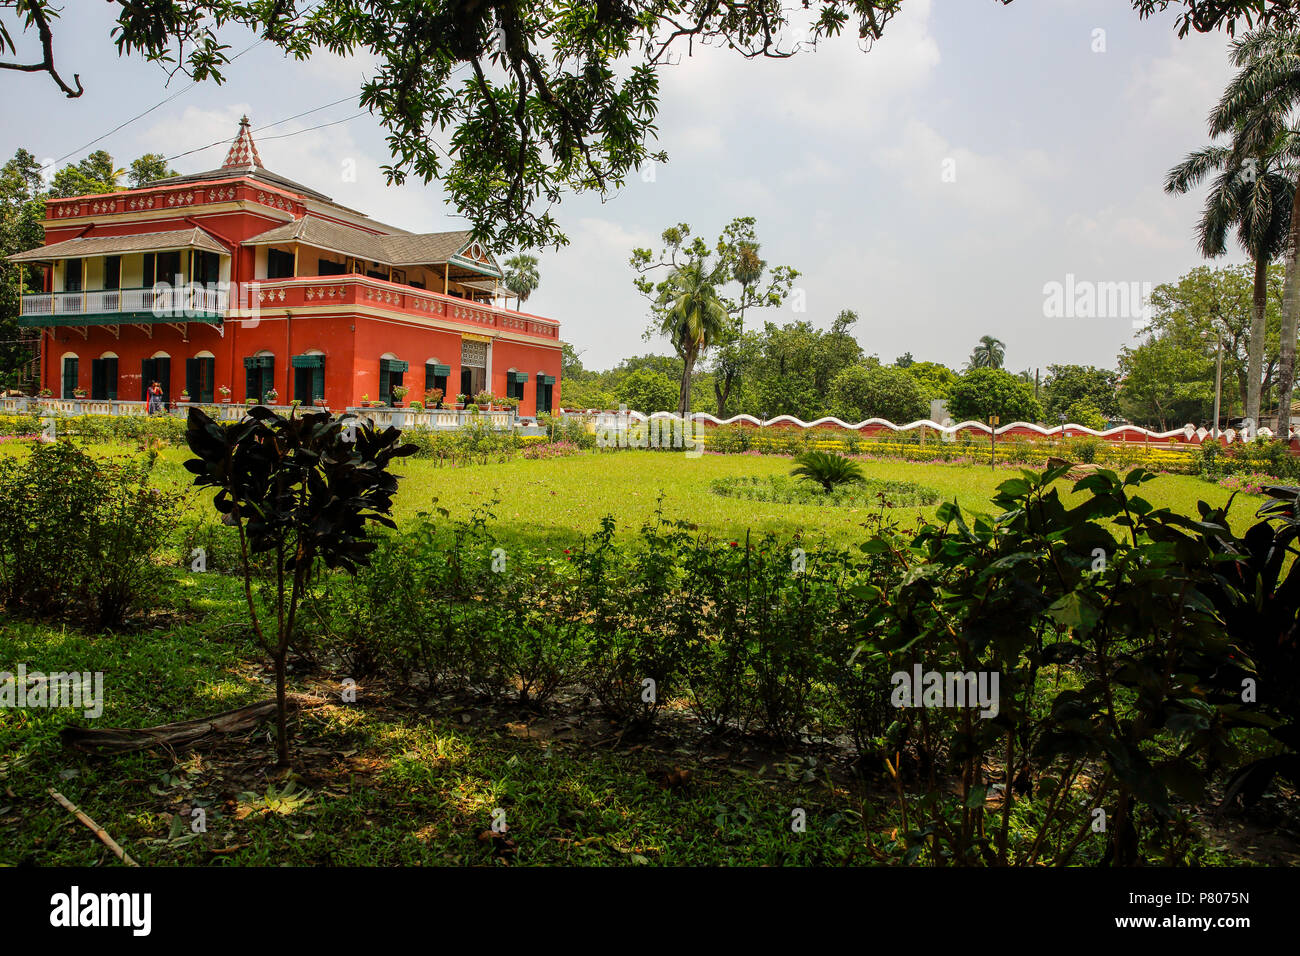 The Shilaidaha Kuthibari in Kushtia, where Poet Rabindranath Tagor occasionally spent time and wrote many poems and different kinds of writings. Bangl Stock Photo